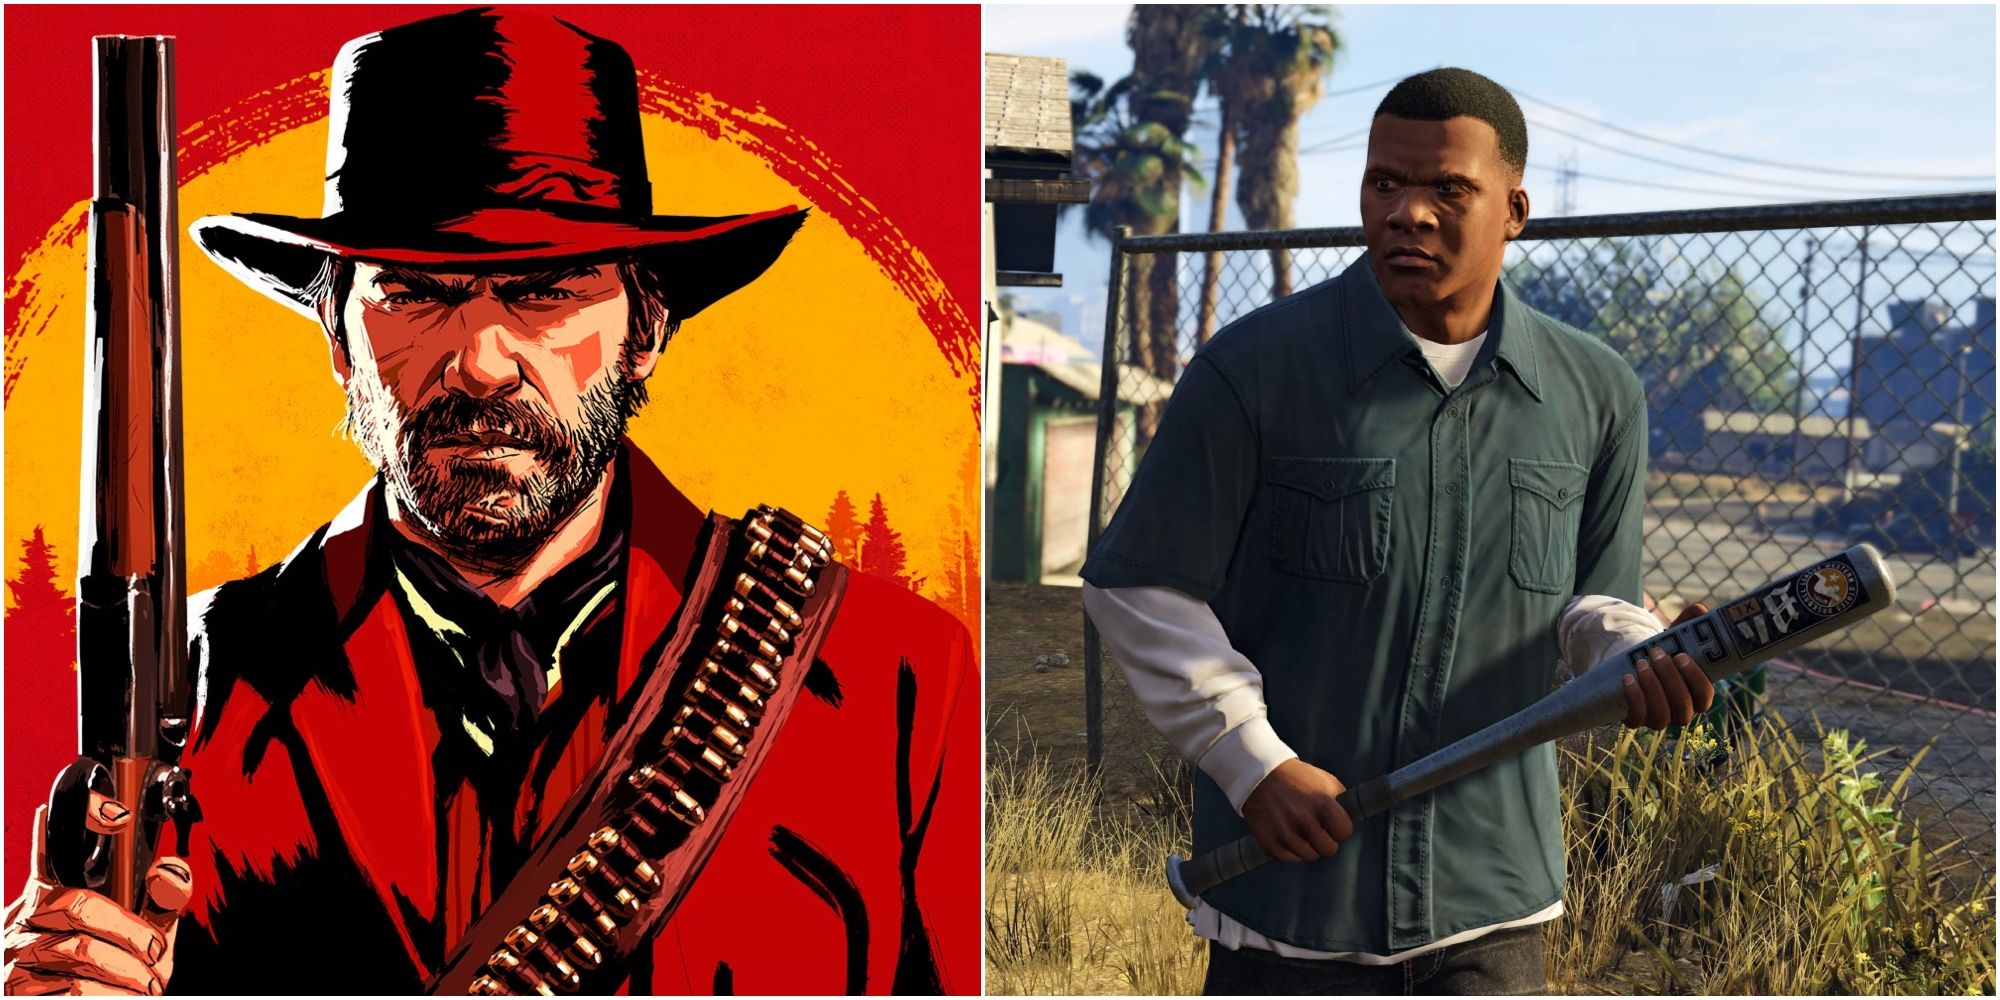 Arthur Morgan from Red Dead Redemption 2 beside Franklin from Grand Theft Auto 5